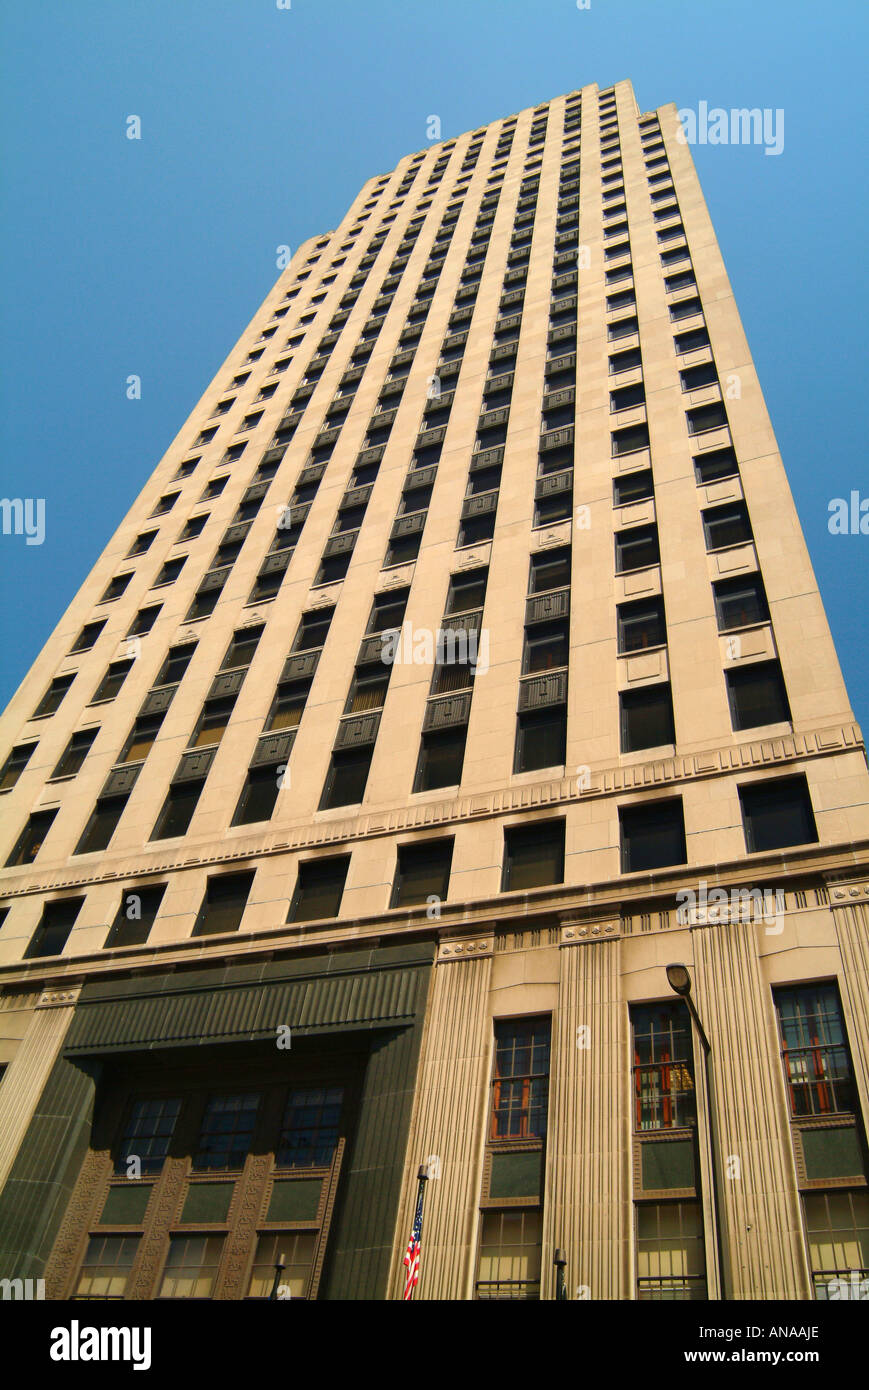 The First National Bank Building Completed in 1930 in St Paul Minnesota USA Stock Photo